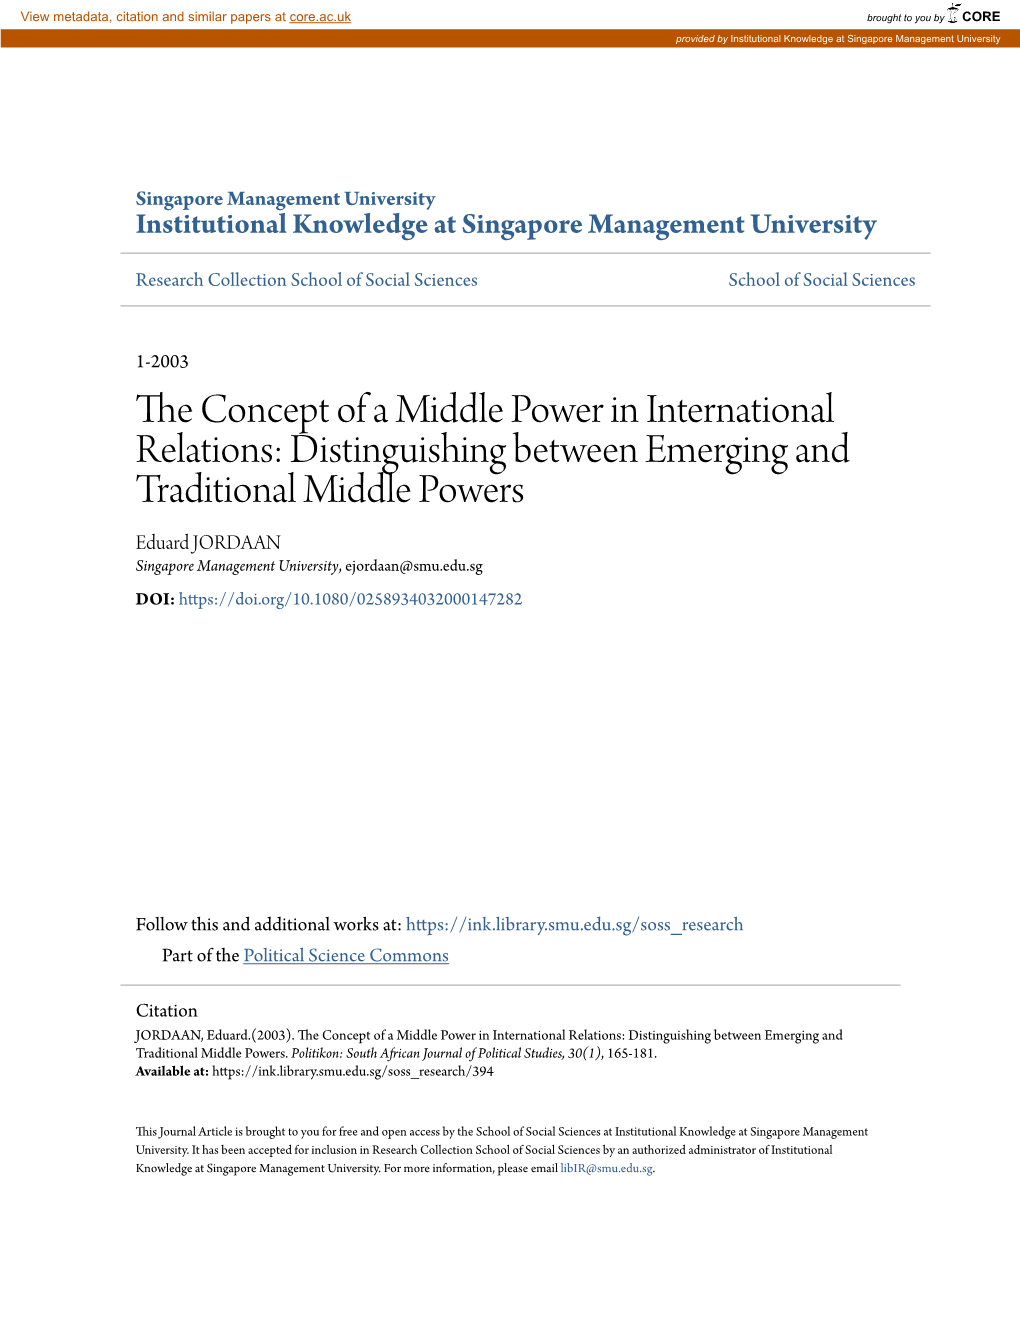 Distinguishing Between Emerging and Traditional Middle Powers